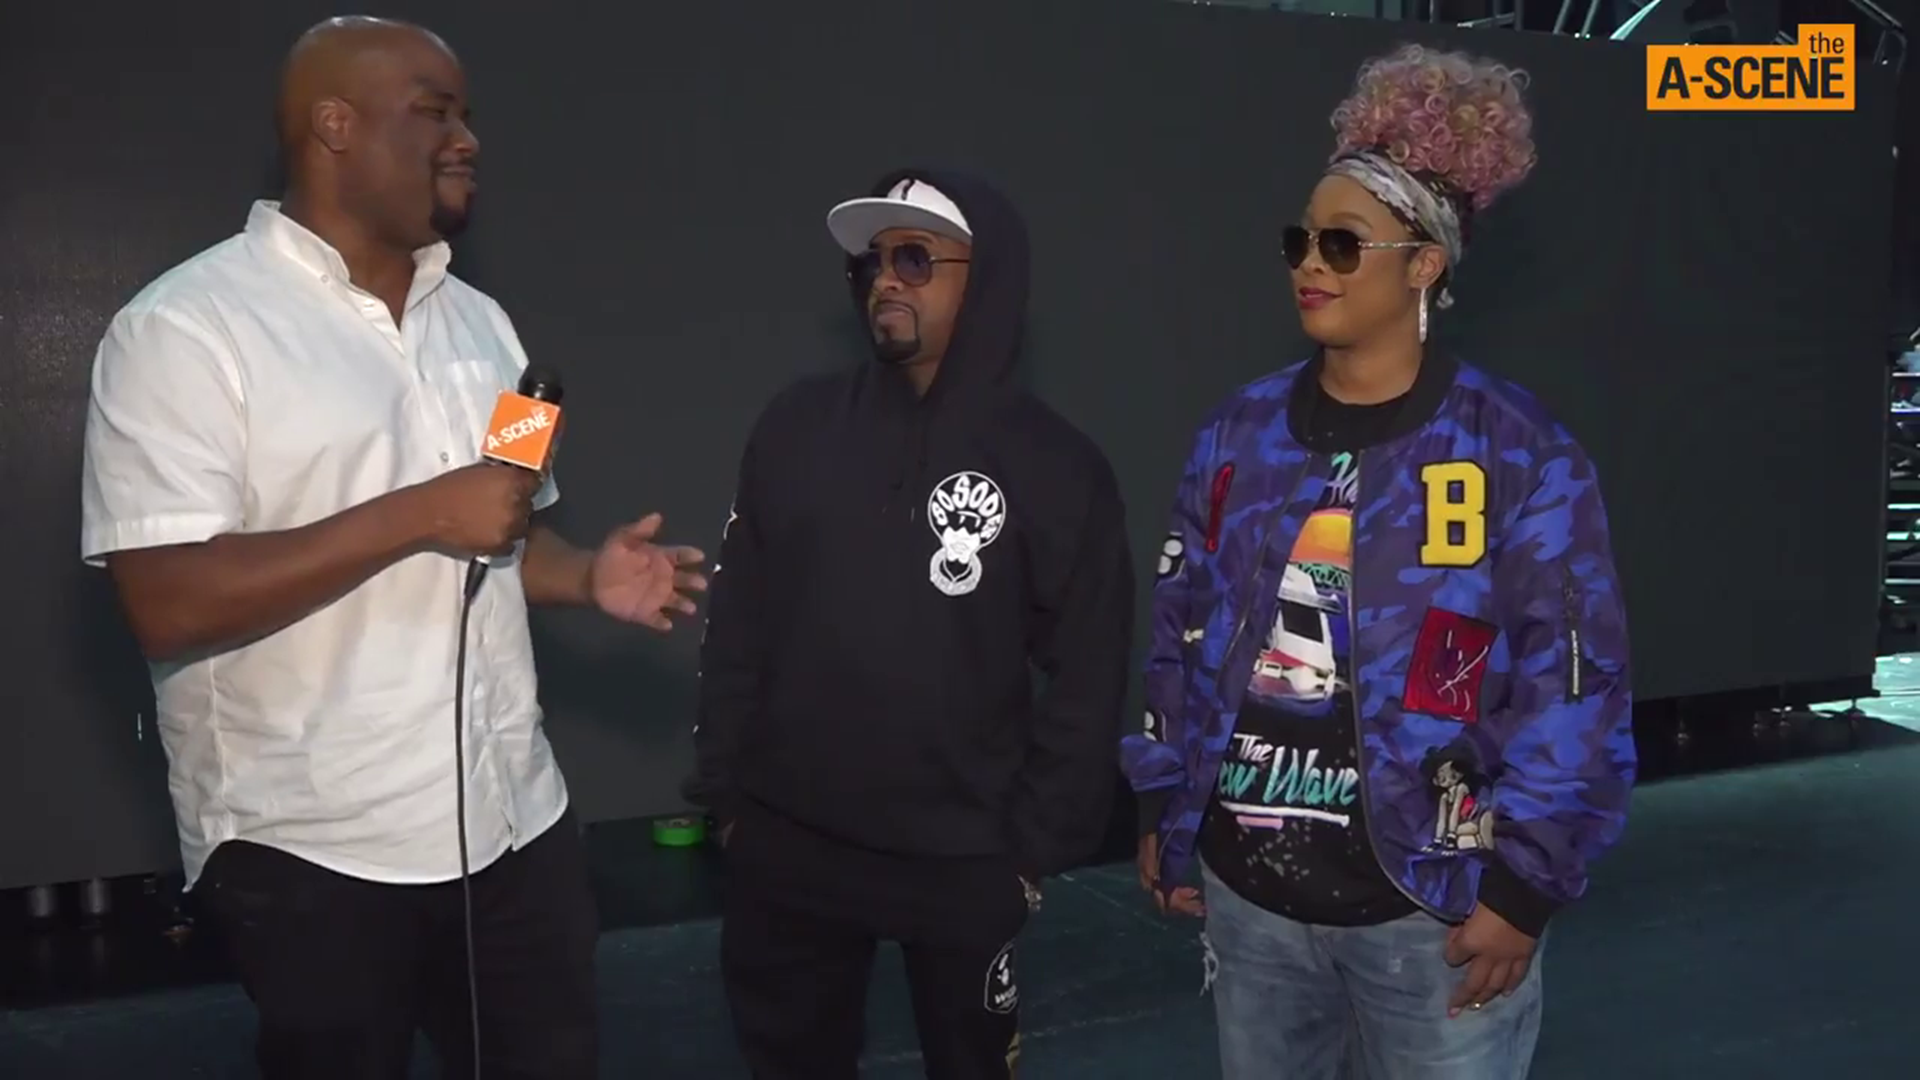 The A-Scene's Ryan Dennis spoke with Jermaine Dupri and Da Brat during the rehearsal for So So Def's Cultural Currency Tour at a secret location. The hip-hop legends reflected on their careers and the next chapter for the label.